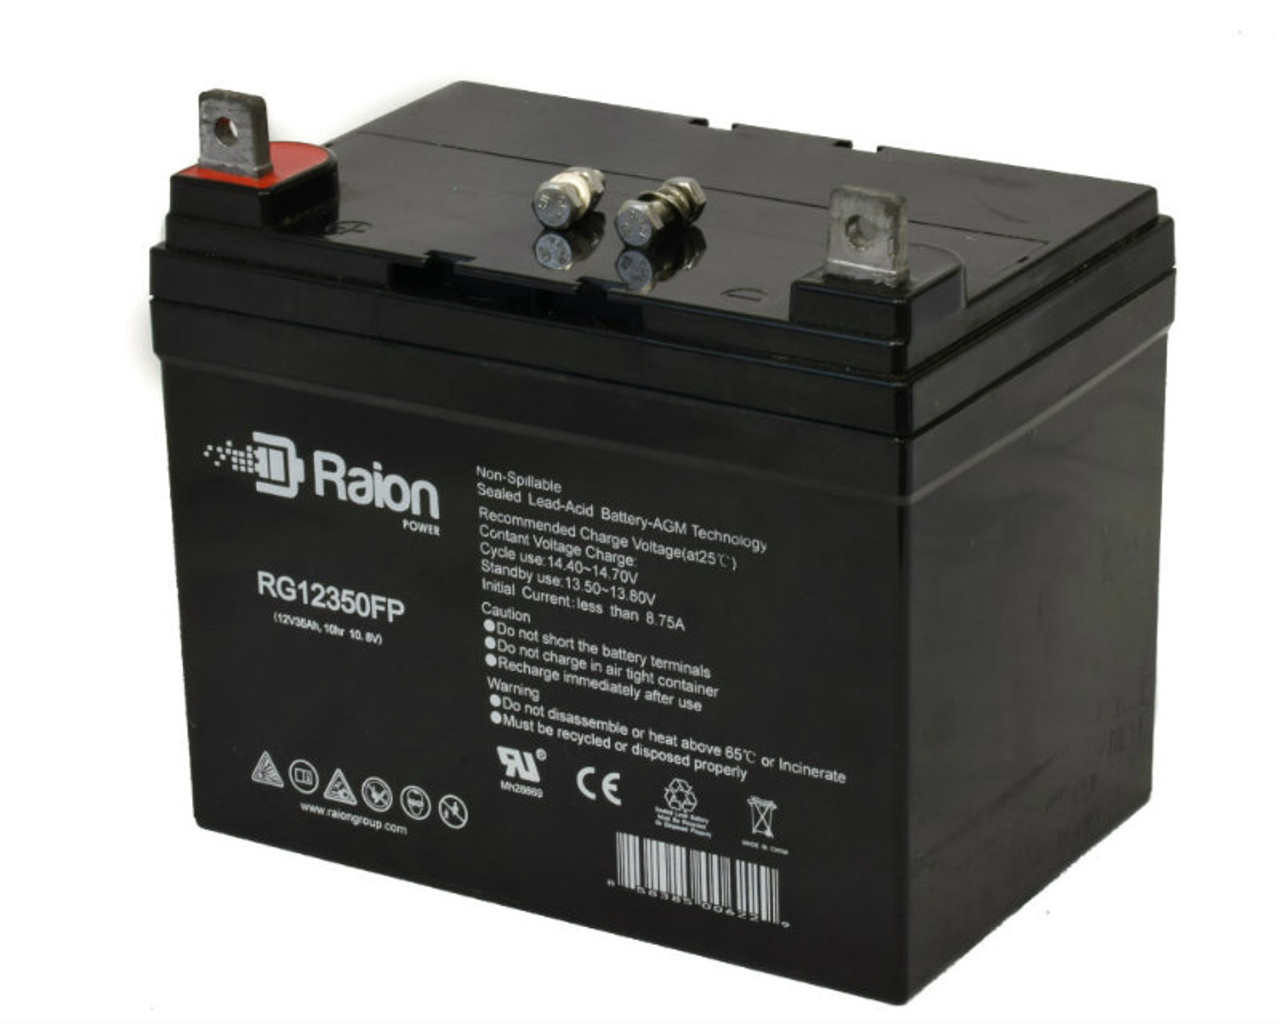 Raion Power Replacement 12V 35Ah RG12350FP Battery for BSB GB12-33